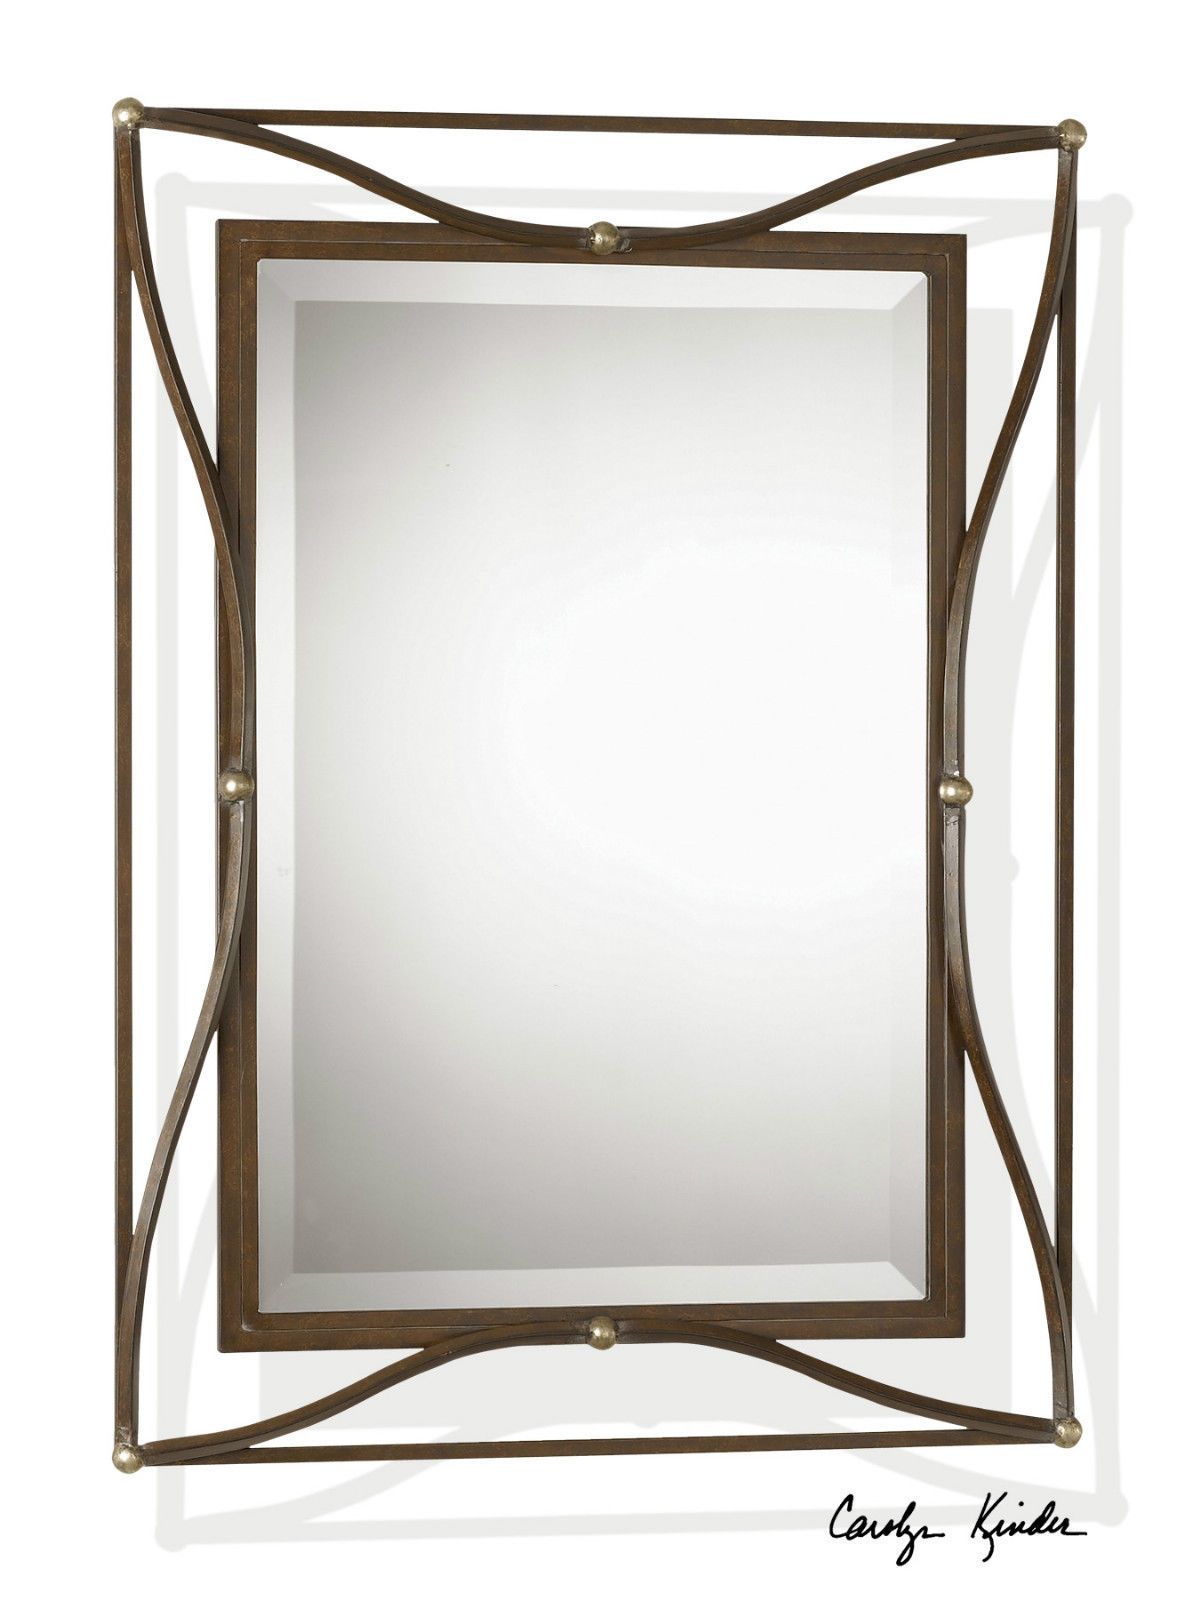 Two New 38" Aged Bronze Iron Rectangular Beveled Wall Mirror Western In Western Wall Mirrors (View 9 of 15)